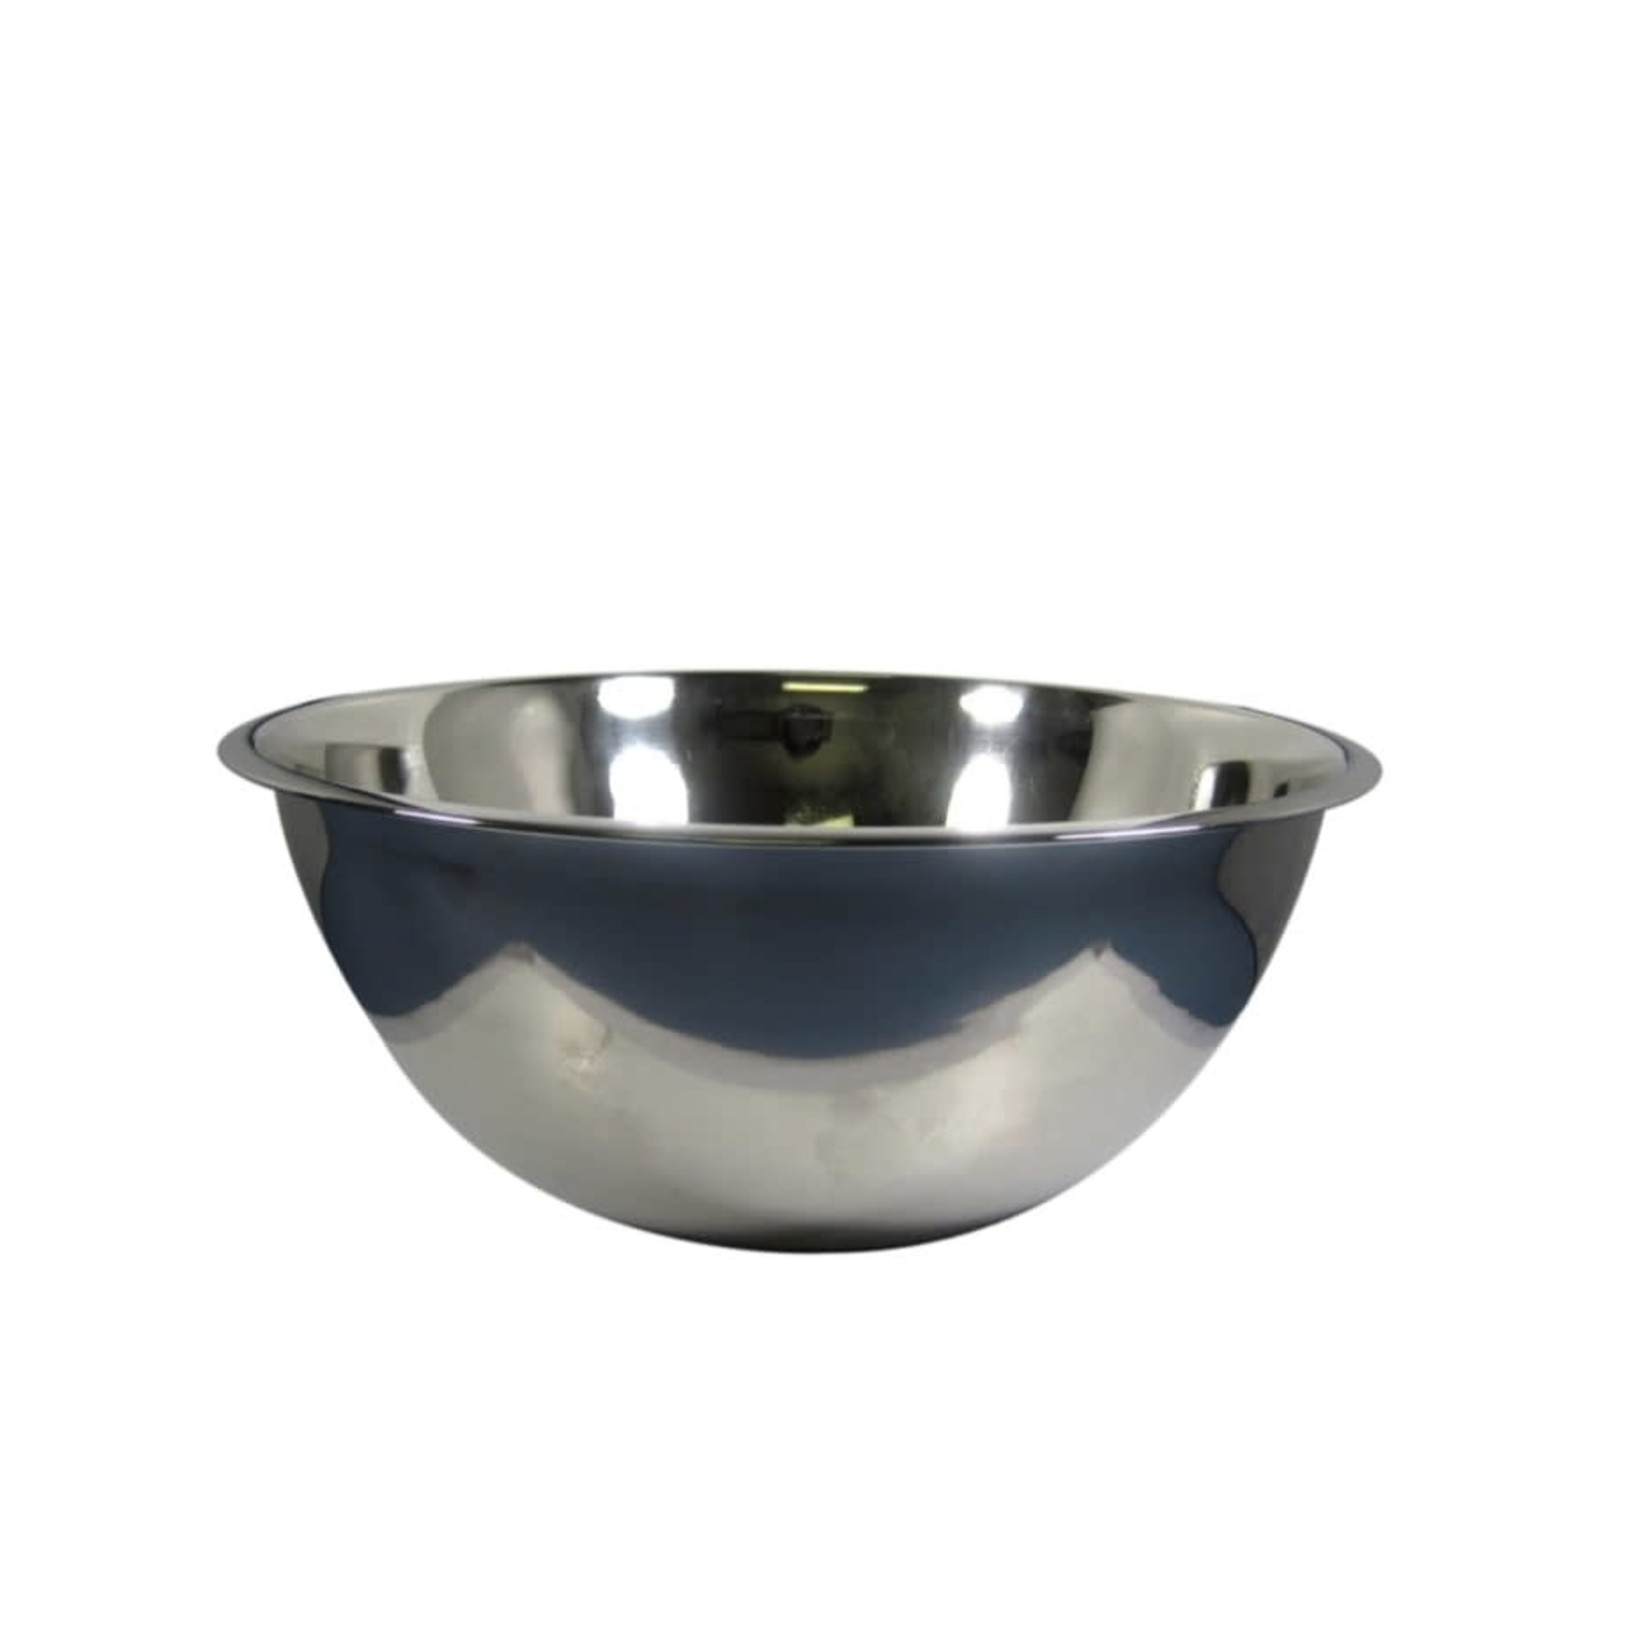 PORT STYLE PORT STYLE Mixing Bowl 5qt - Stainless